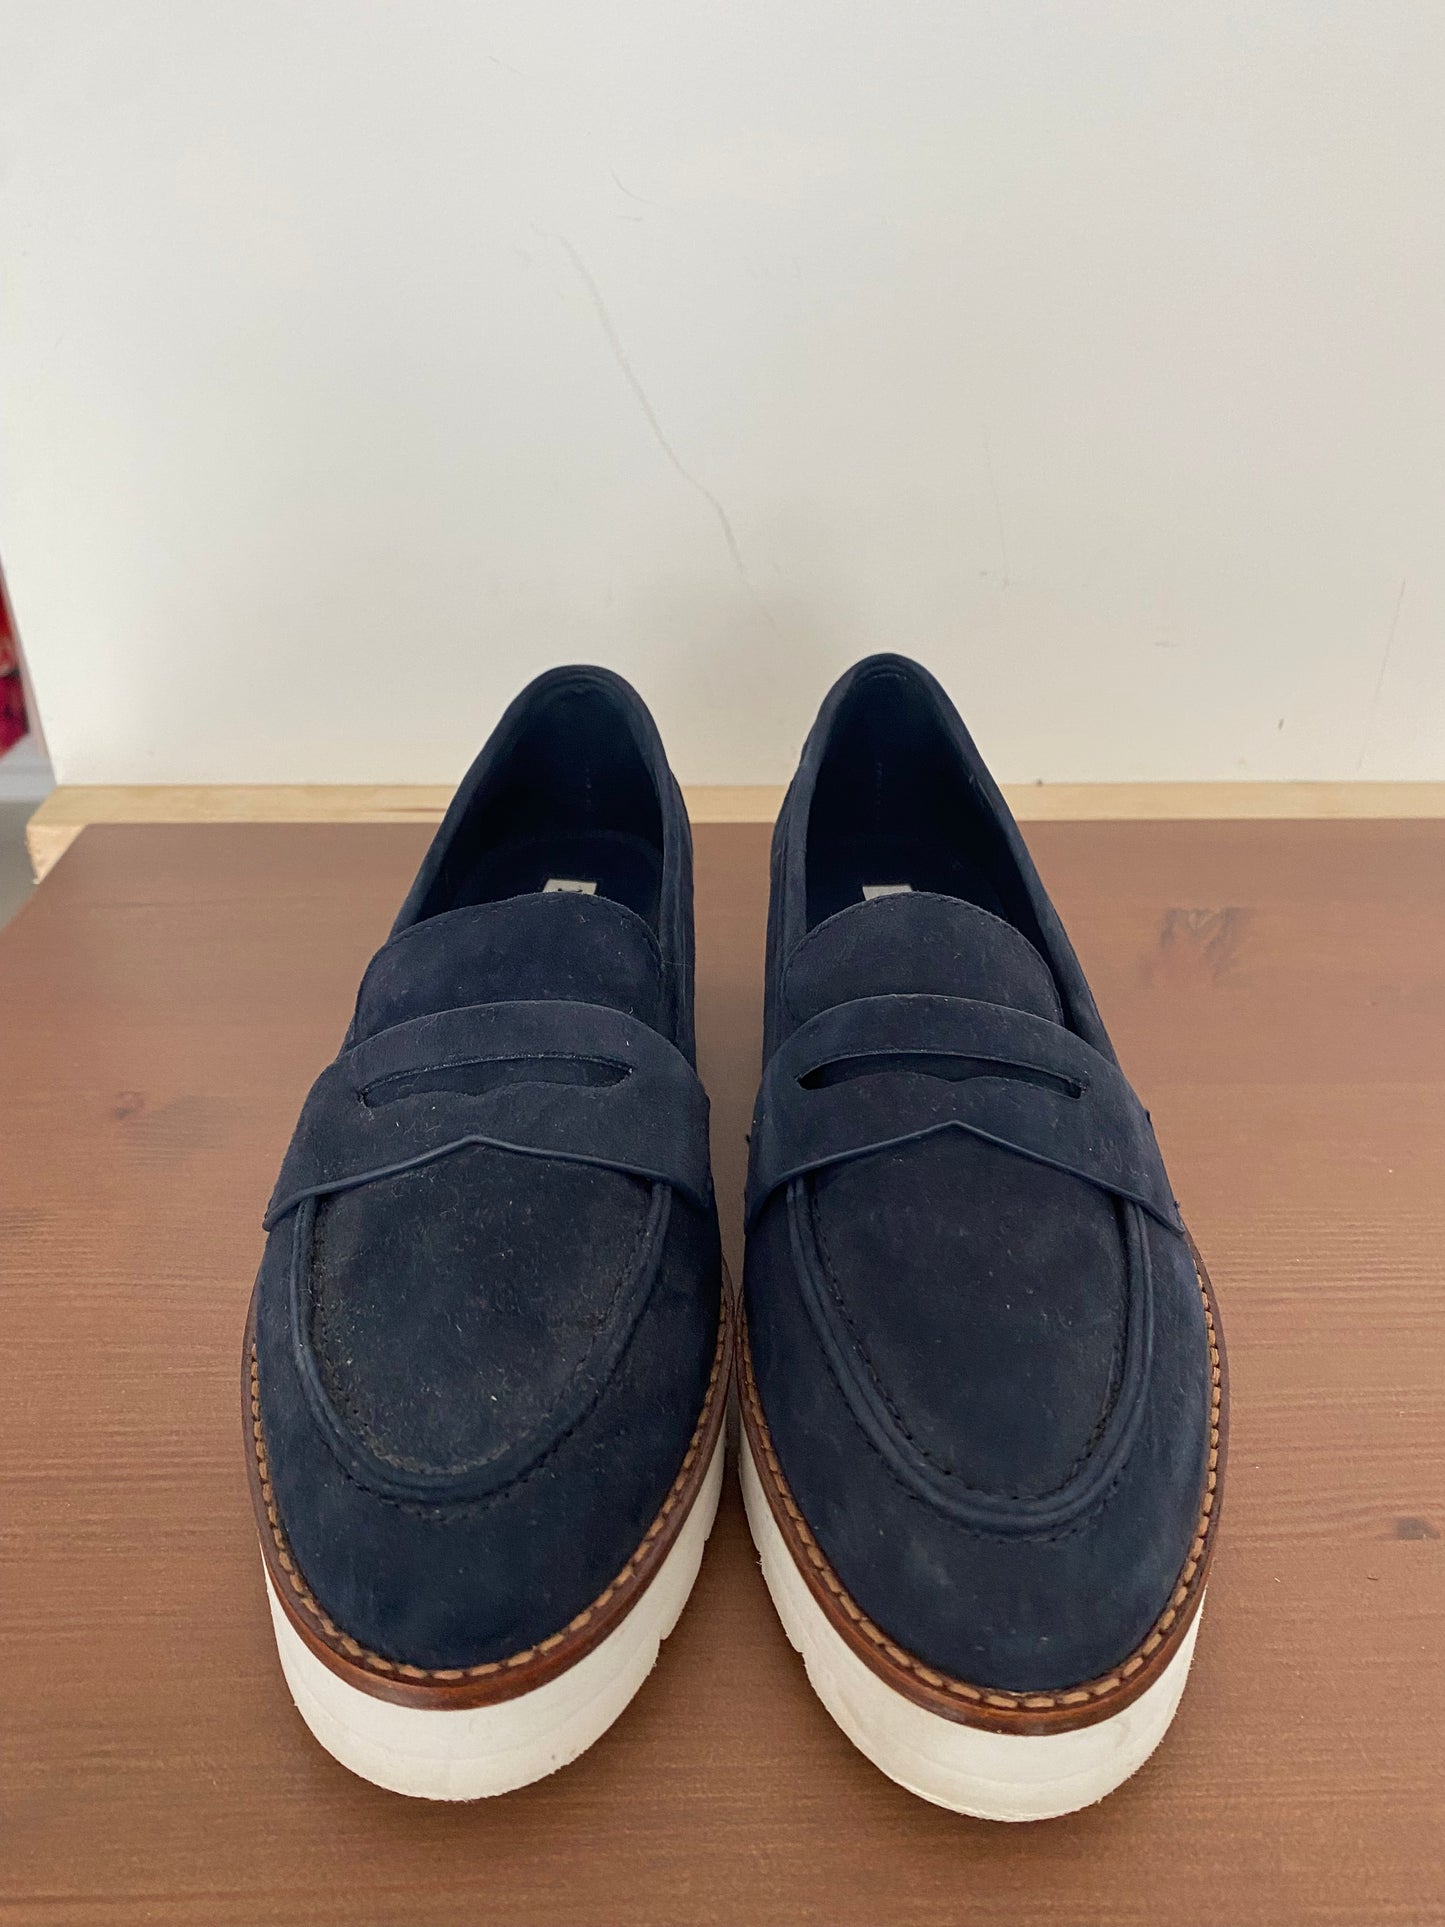 Dune Blue Suede Loafers Size 4